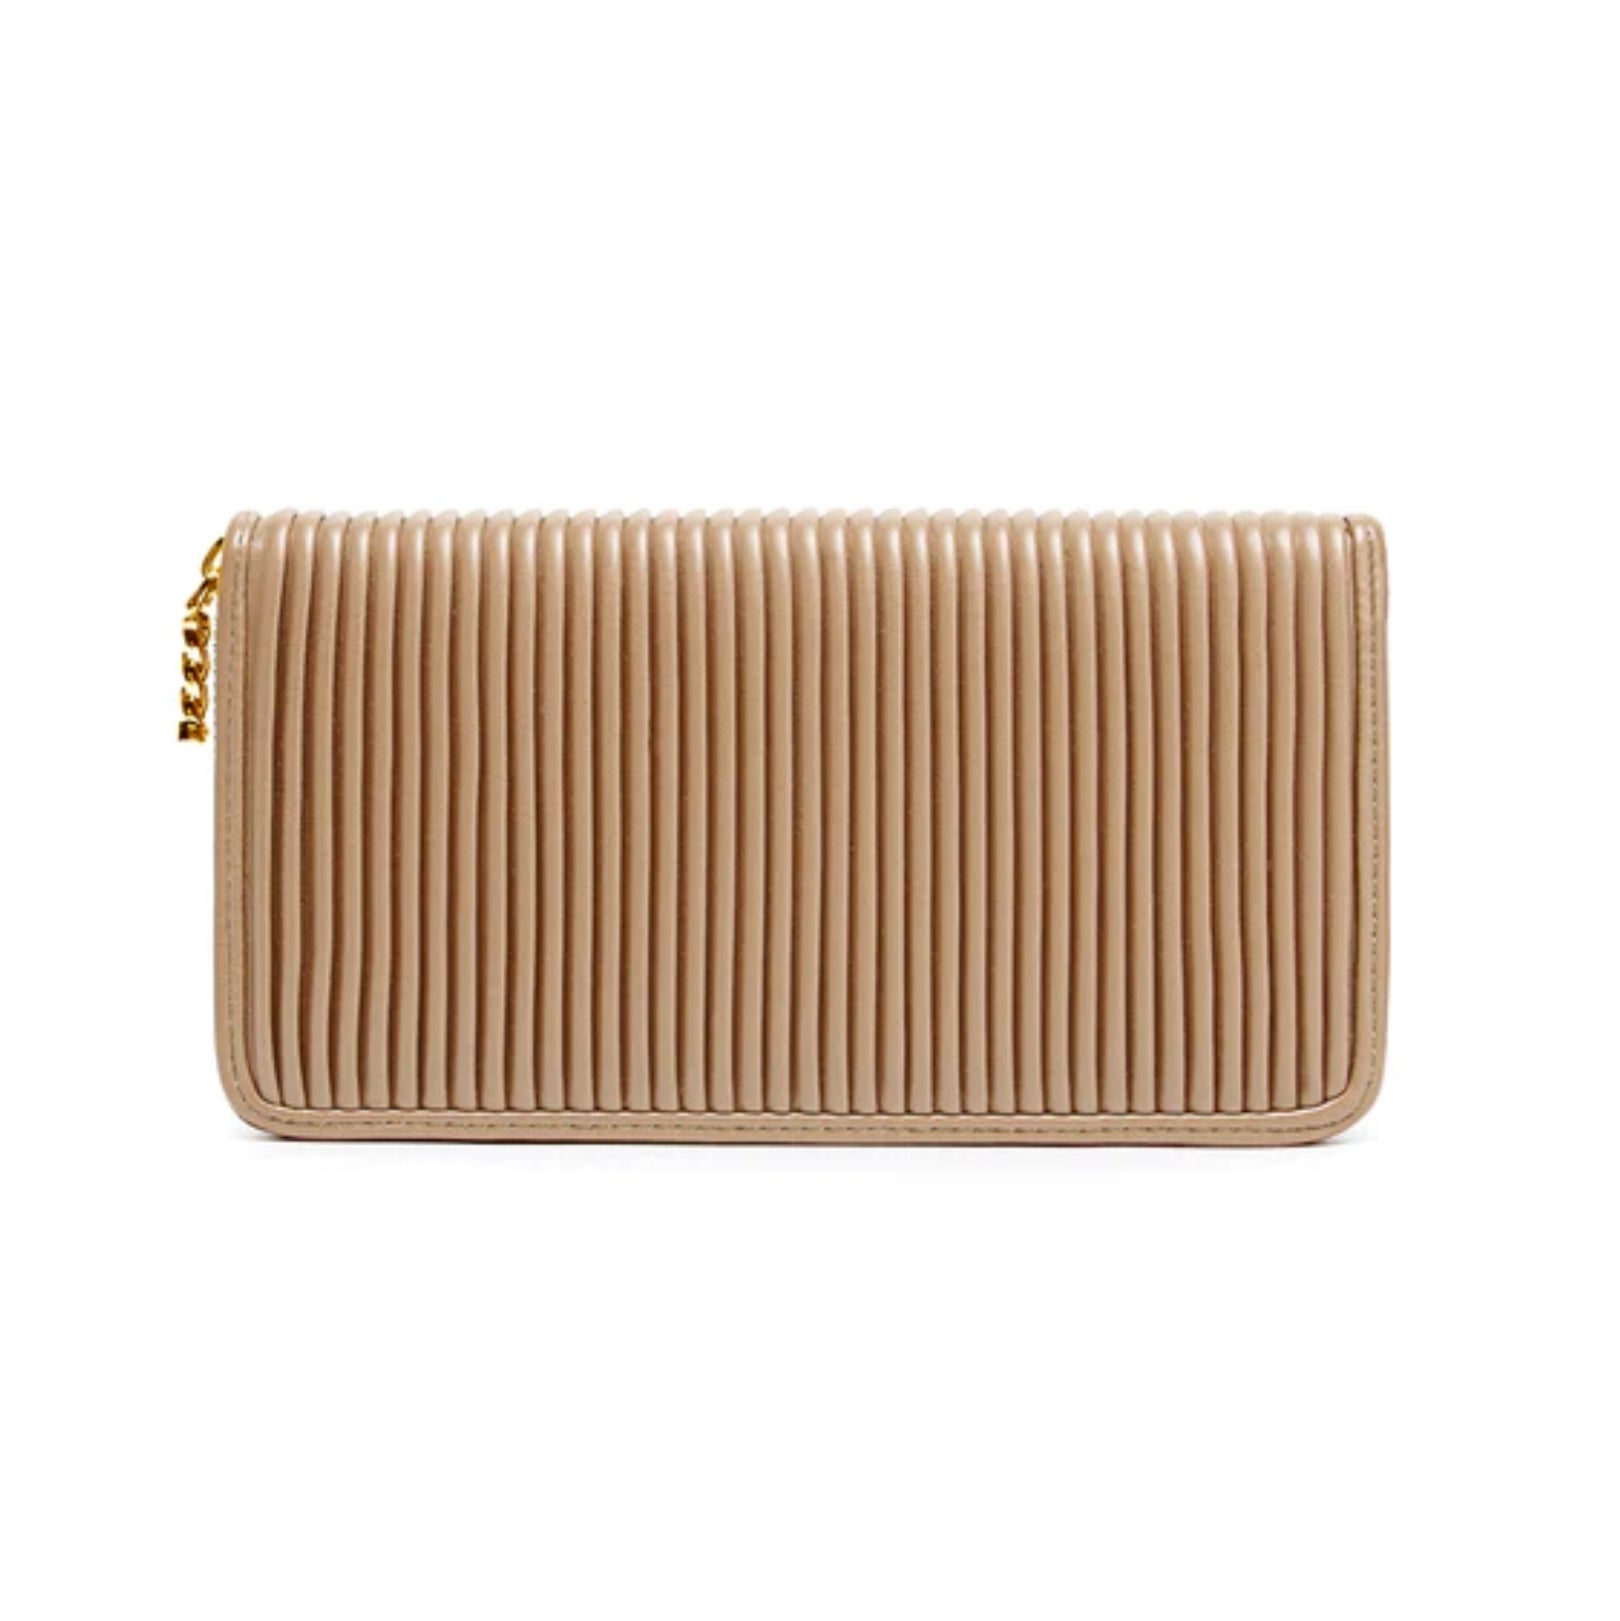 Sandy pleated wallet by Pixie Mood - sand - Blue Sky Fashions & Lingerie